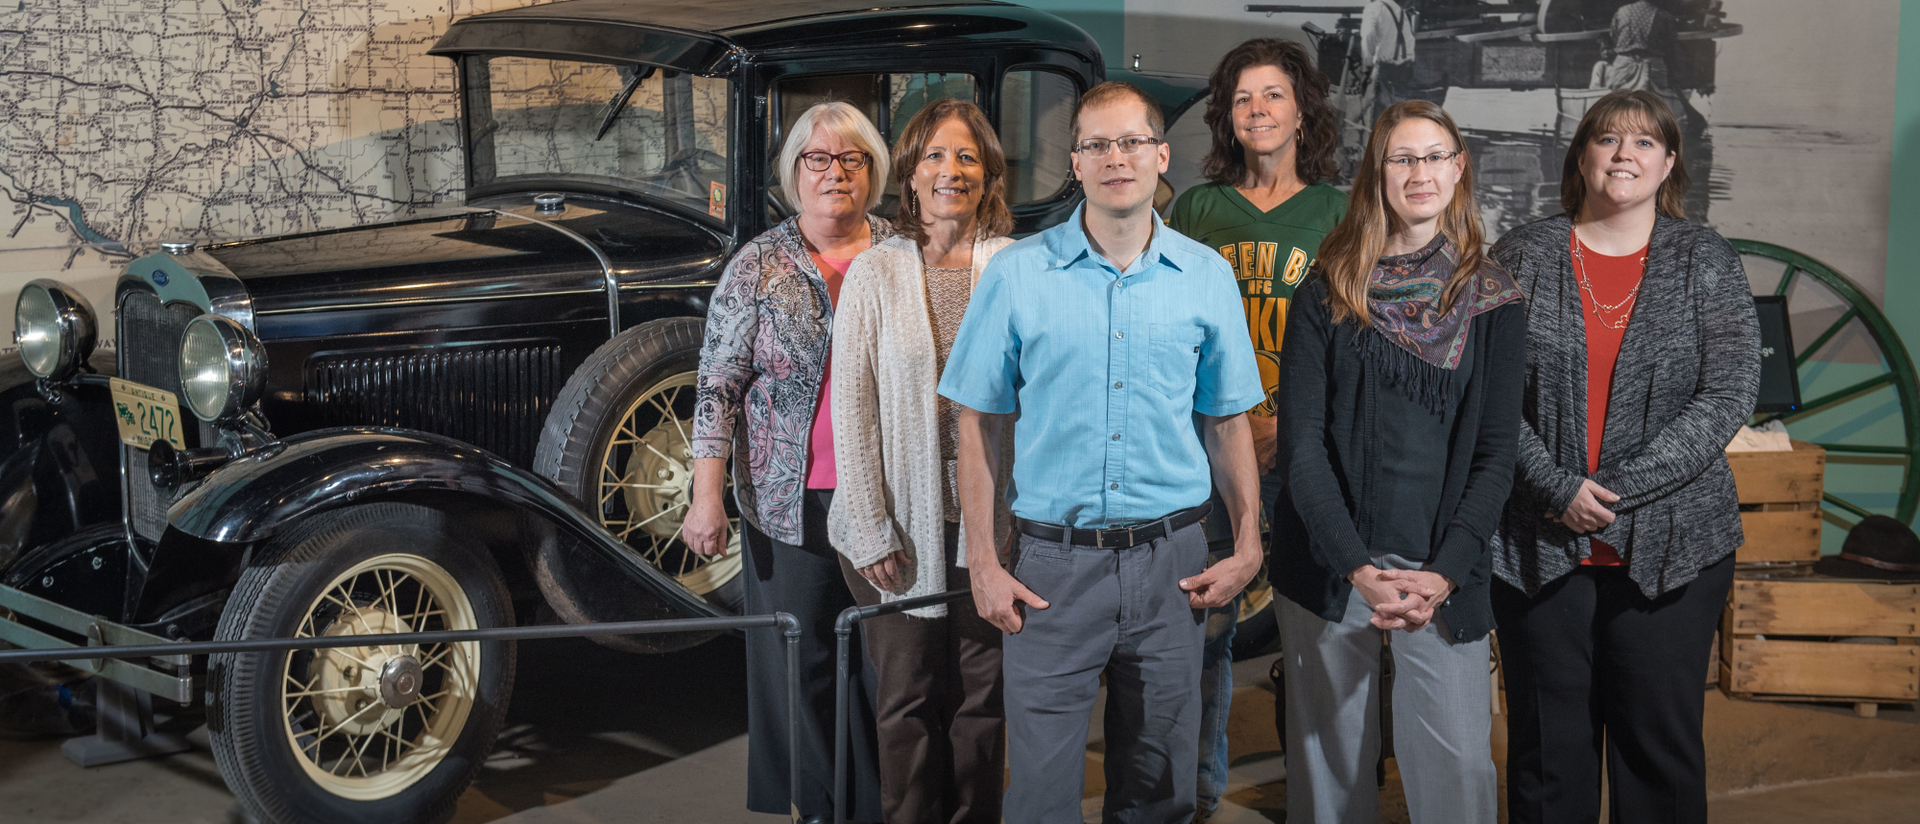 Alumni working at Chippewa Valley Museum